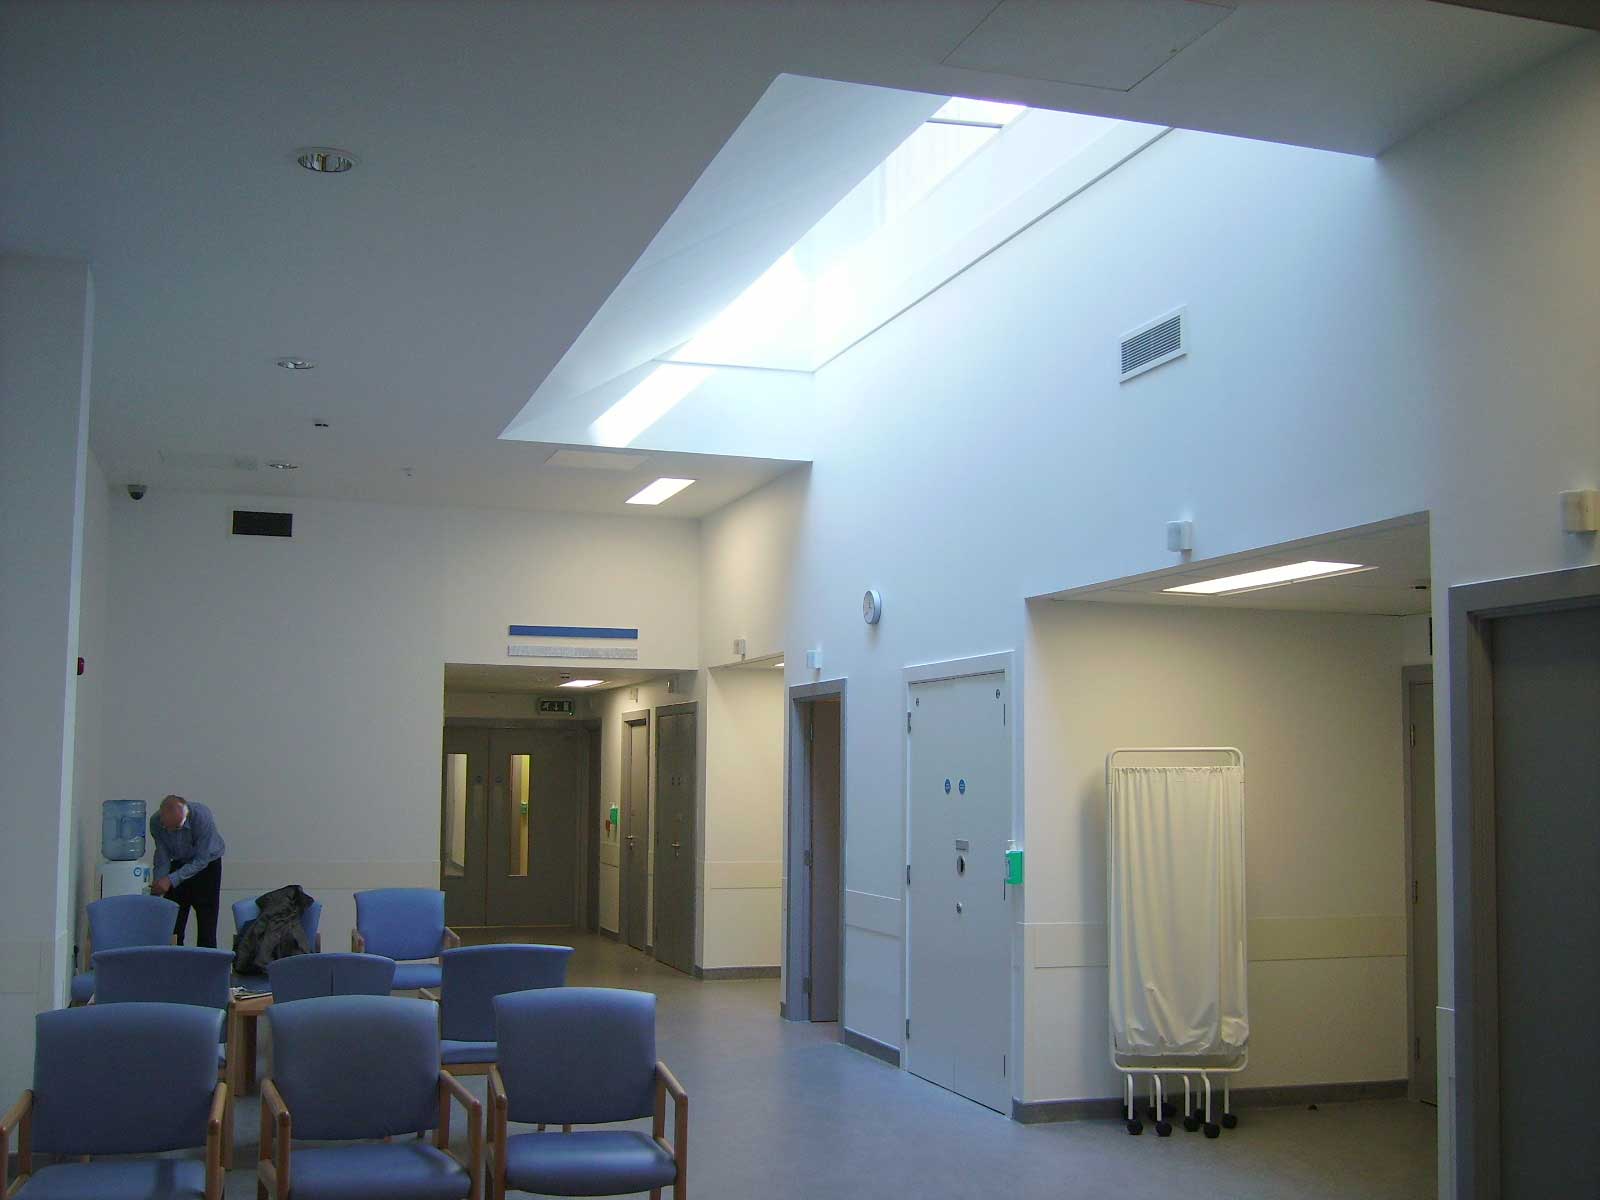 A waiting area in a hospital setting with light coming in from a roof light